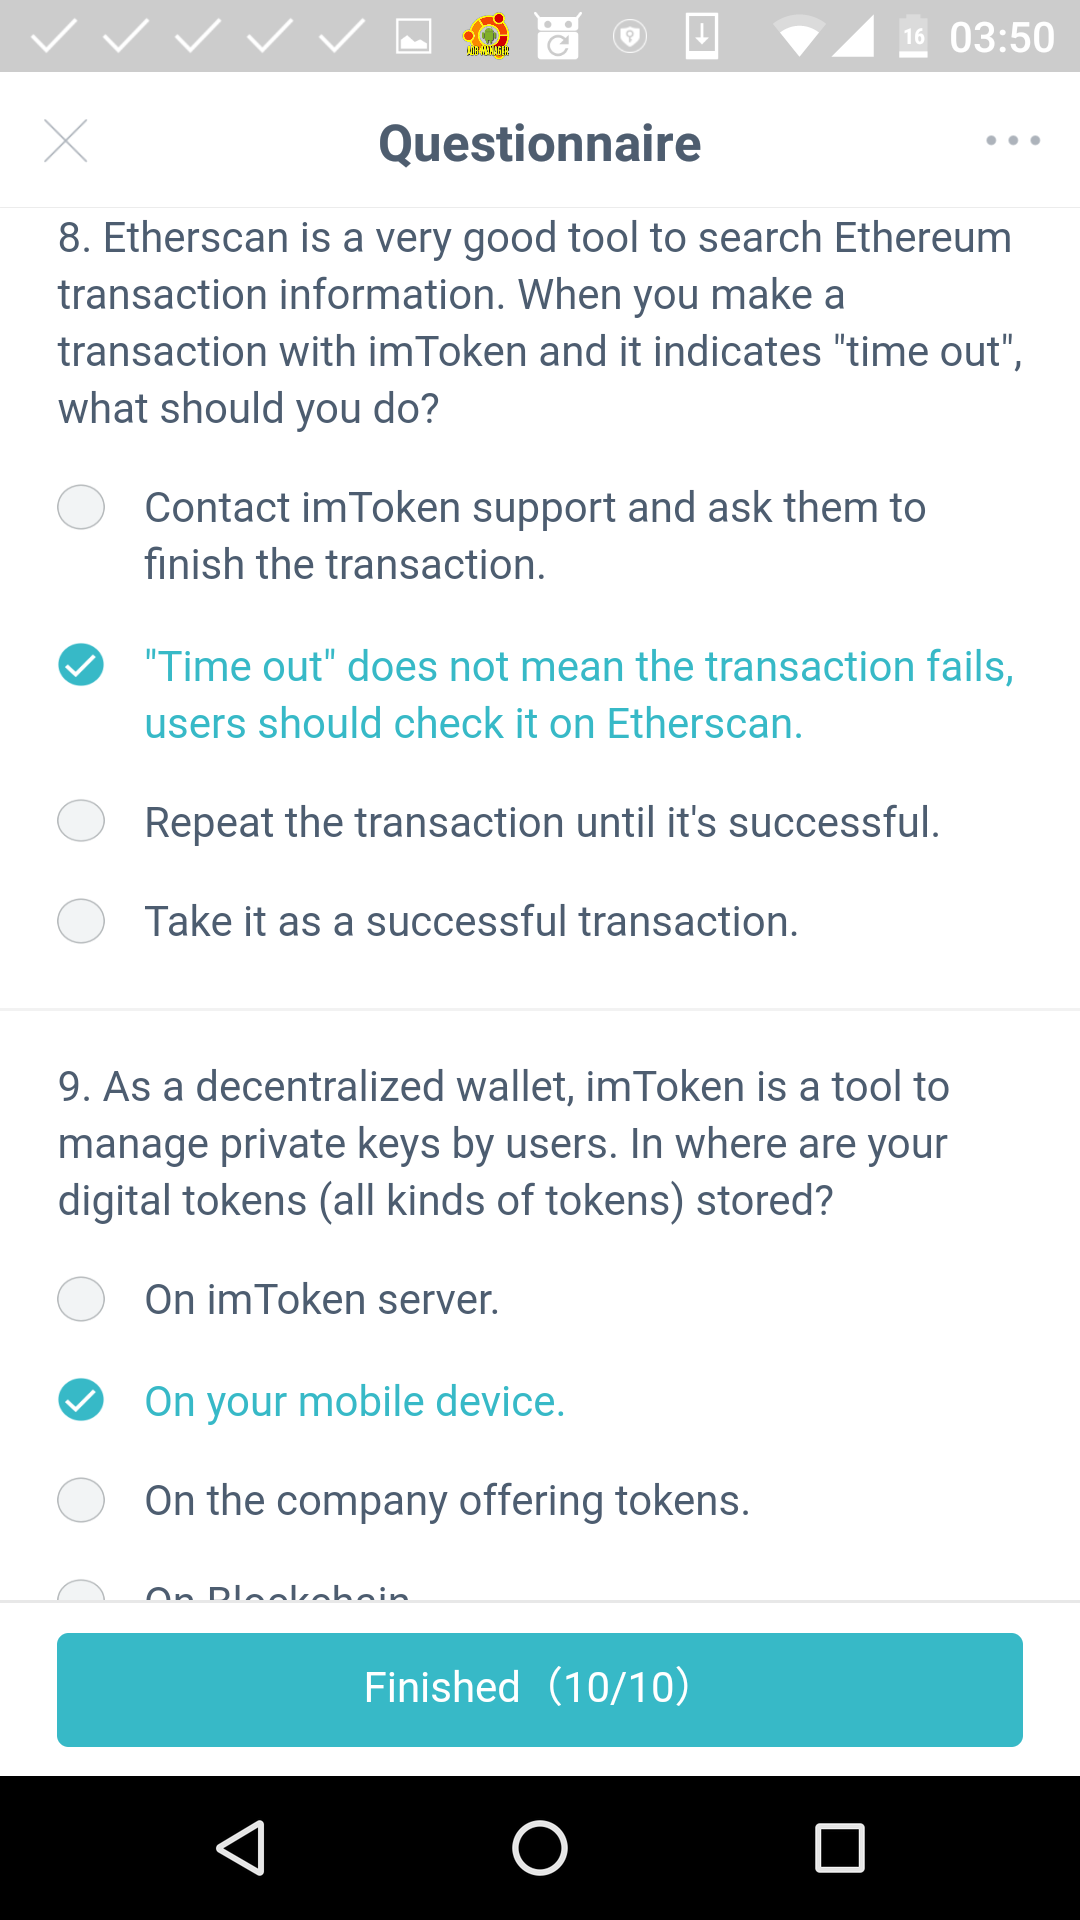 8. "Time out" does not mean the transaction fails, users should check it on Etherscan. 9. On your mobile device.